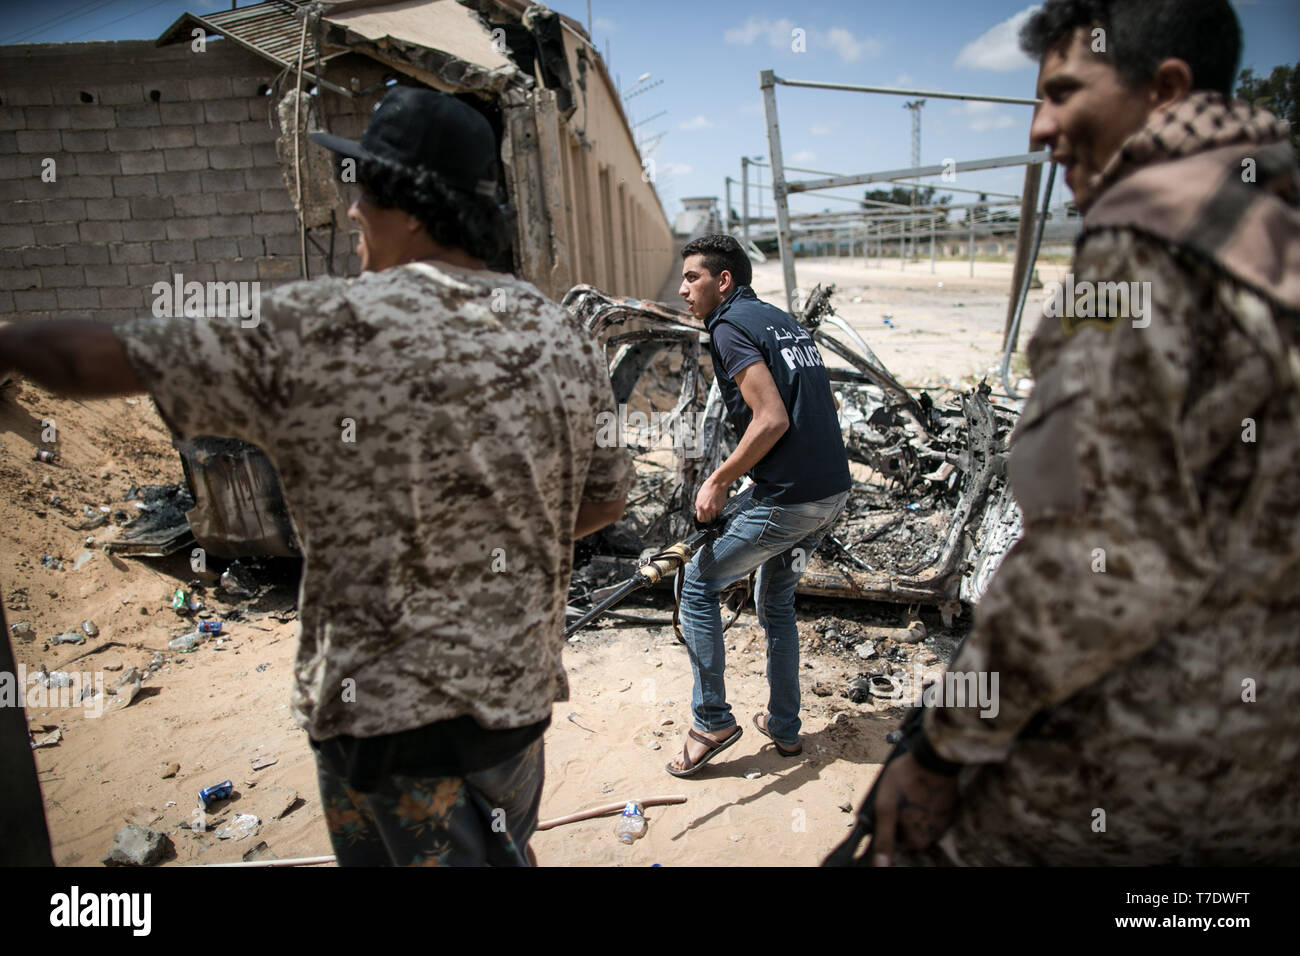 Tripoli, Libya. 6th May, 2019. Fighters from forces of the UN-backed Libyan government are seen in Salah Al-Din frontline, Tripoli, Libya, on May 6, 2019. A total of 432 people have been killed and 2,069 others injured in the fighting between the UN-backed Libyan government and the east-based army in and around the capital Tripoli, the World Health Organization (WHO) said Monday. Credit: Amru Salahuddien/Xinhua/Alamy Live News Stock Photo